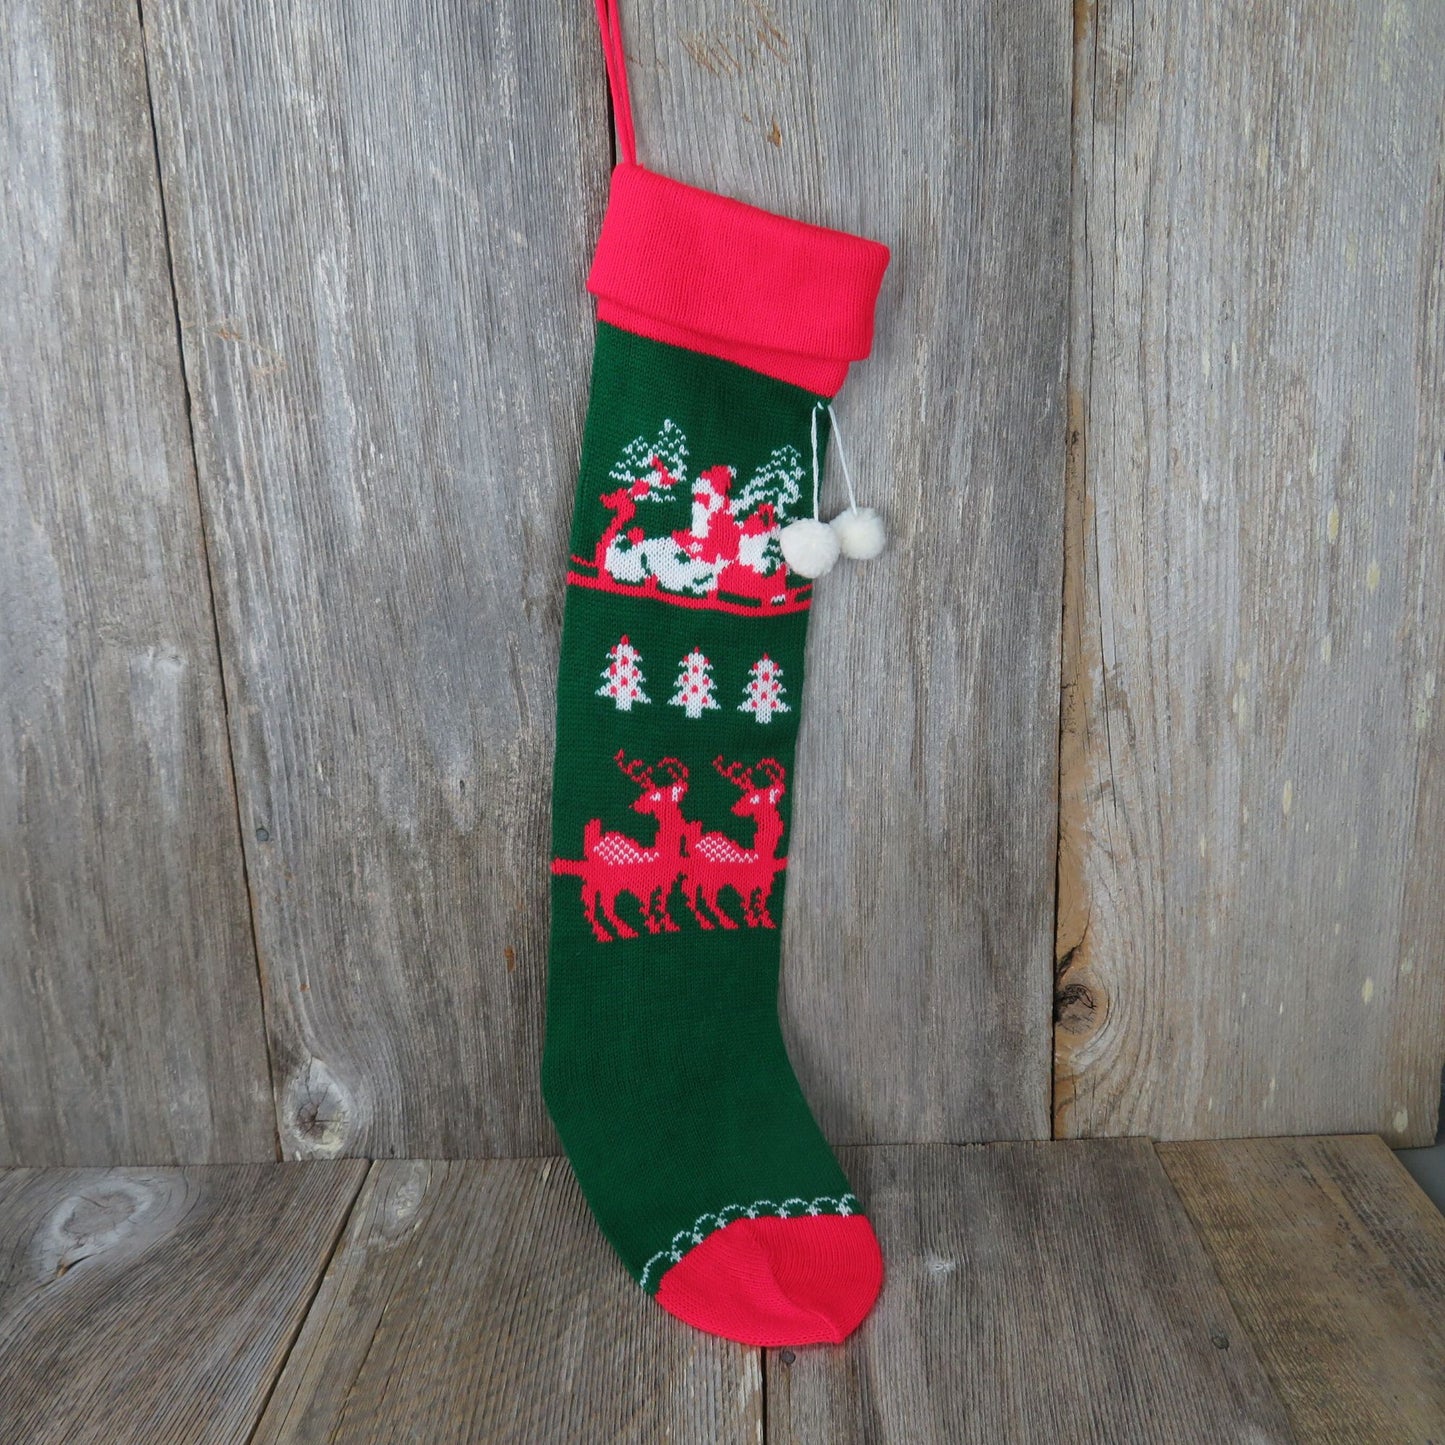 Reindeer And Sleigh Knit Stocking Santa Christmas Knitted White Red Green 1980s